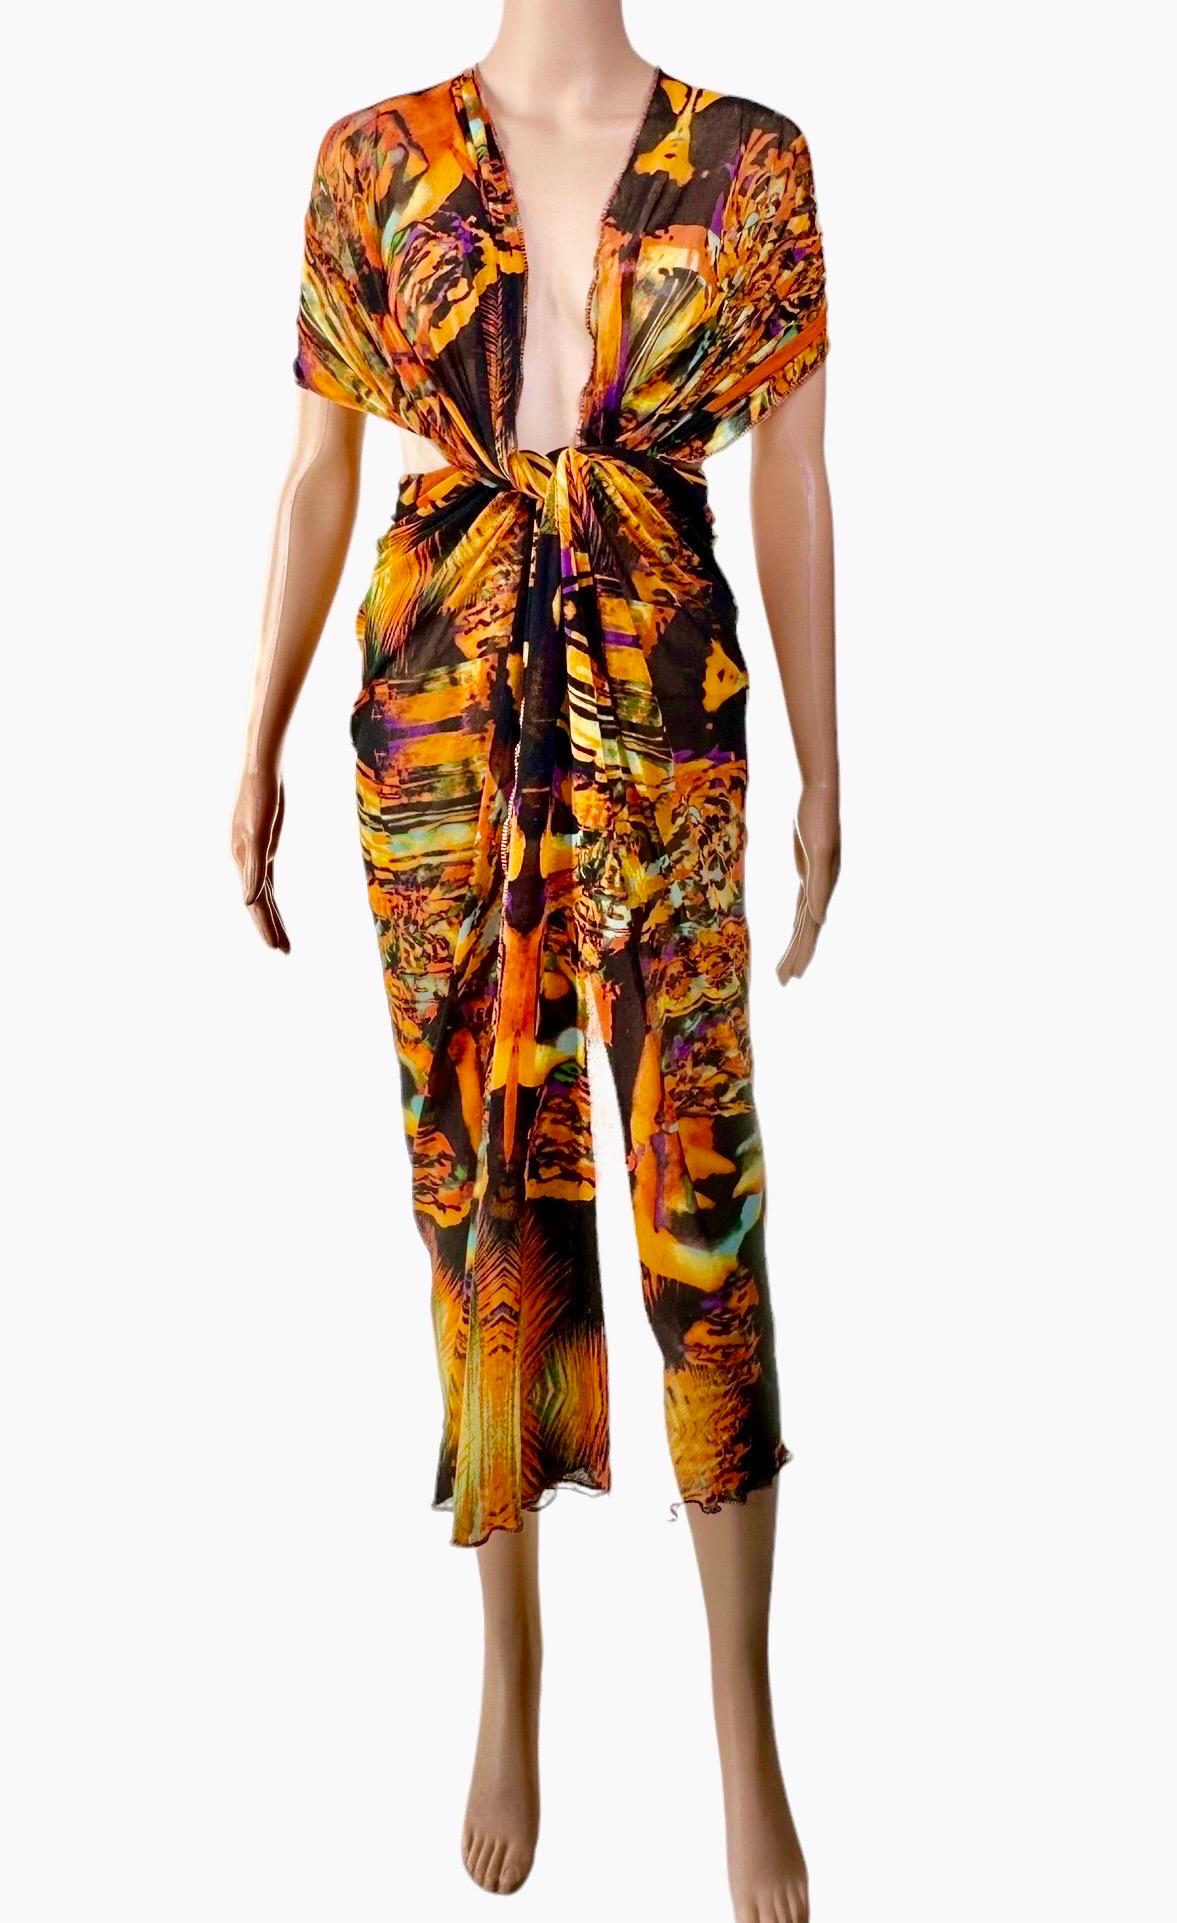 Jean Paul Gaultier S/S 2000 Psychedelic Print Mesh Wrap Dress Scarf Sarong Pareo 9